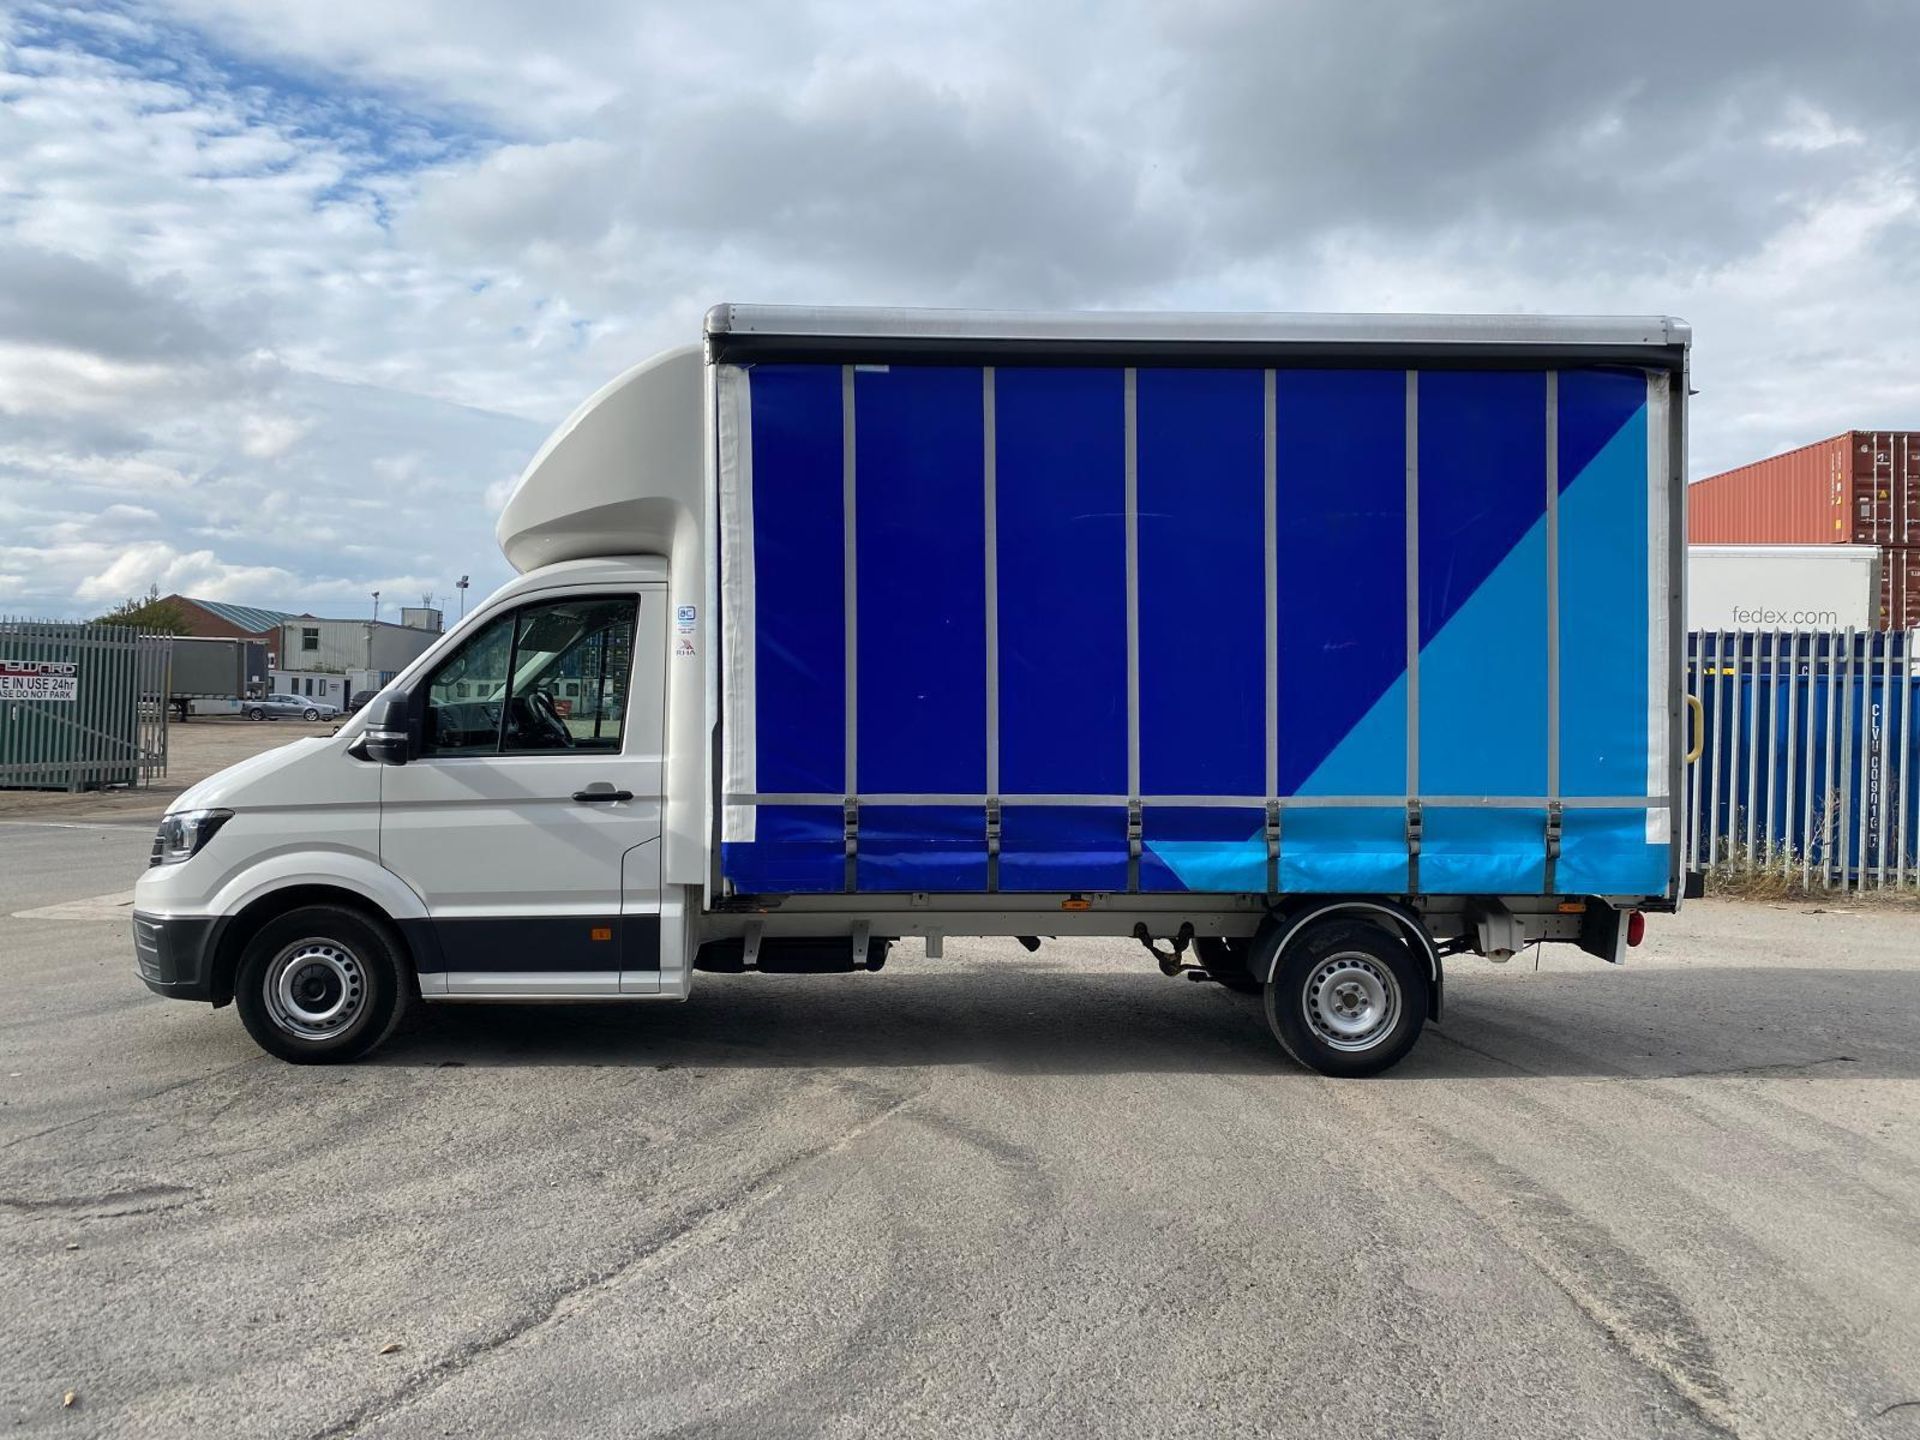 2019 VW CRAFTER 14FT CURTAIN SIDER: RELIABLE WORKHORSE - Image 2 of 12